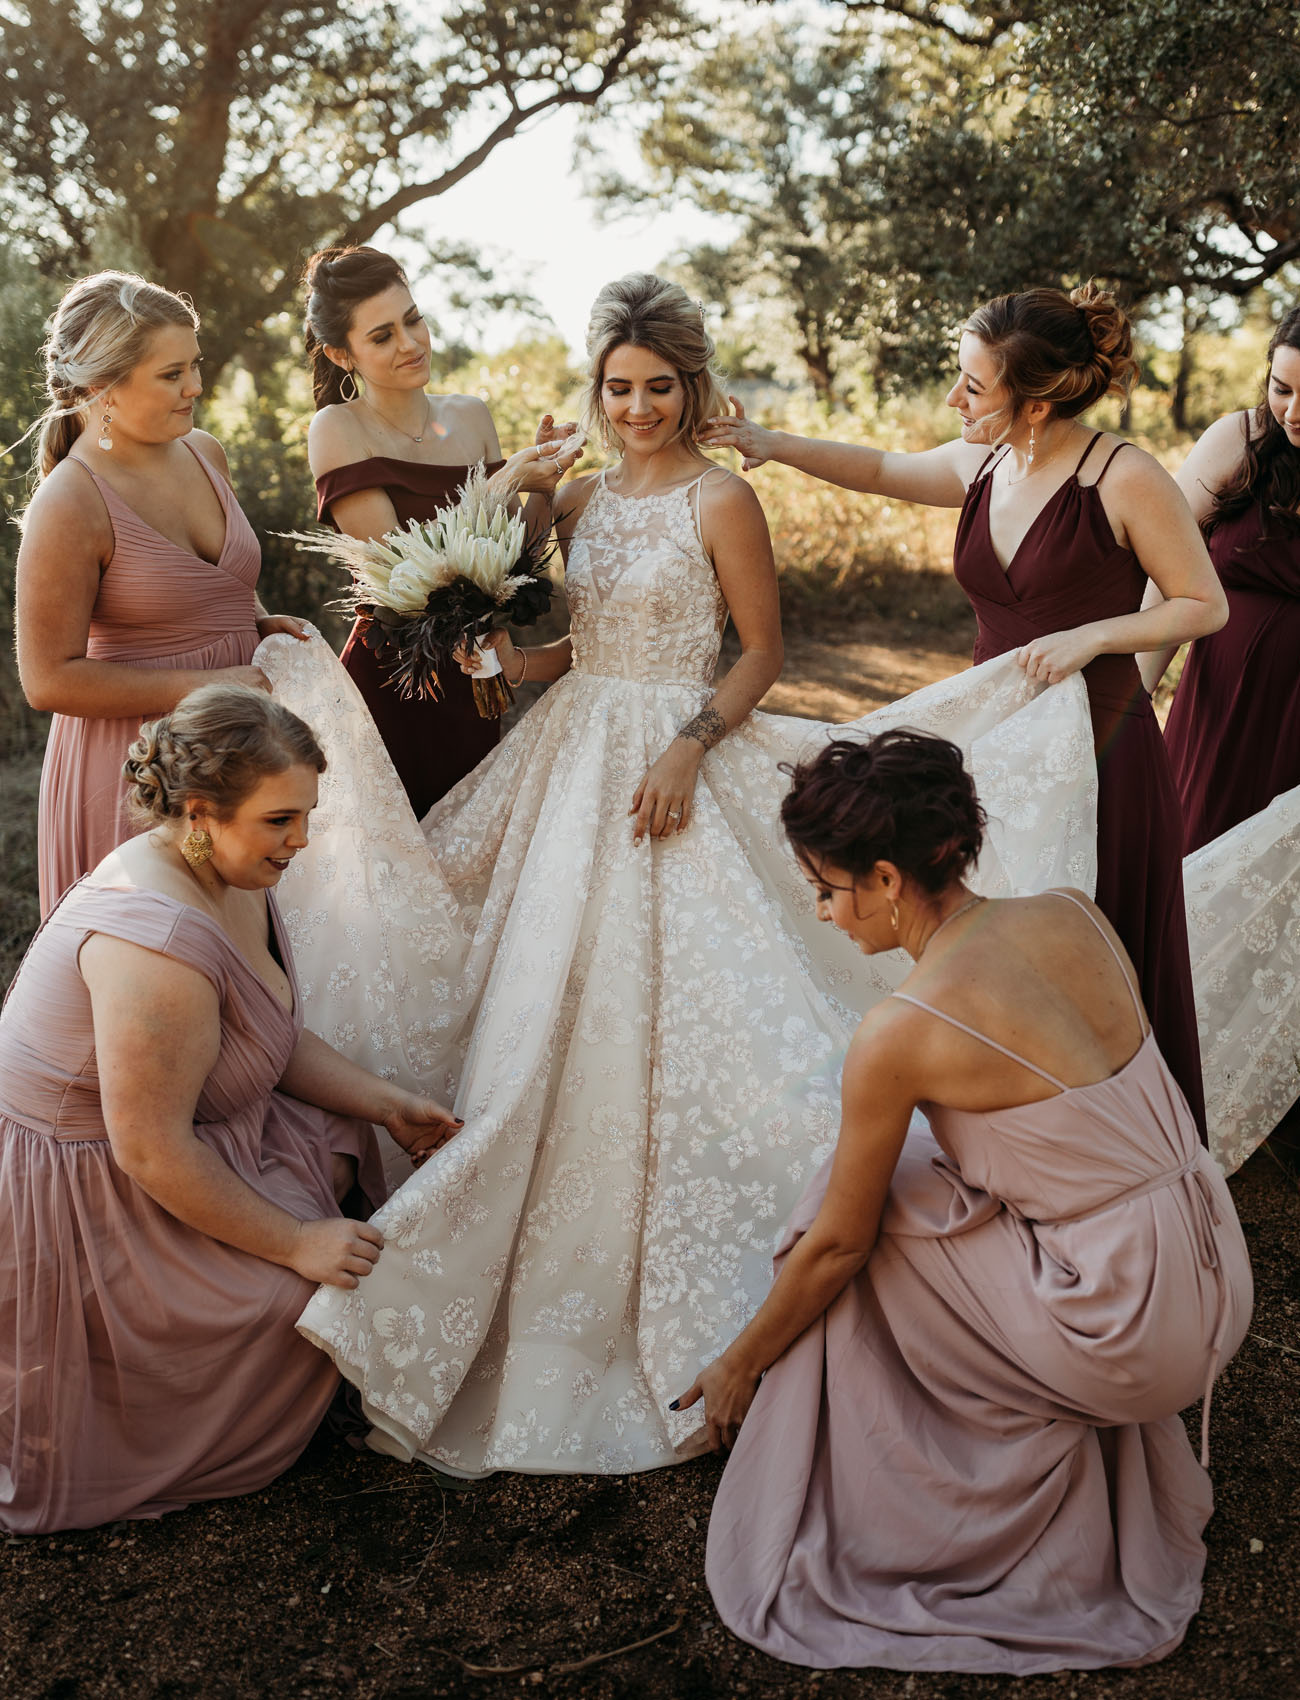 The wedding dress was a super romantic floral ballgown with an illusion neckline, the bridesmaids were wearing dusty pink and burgundy